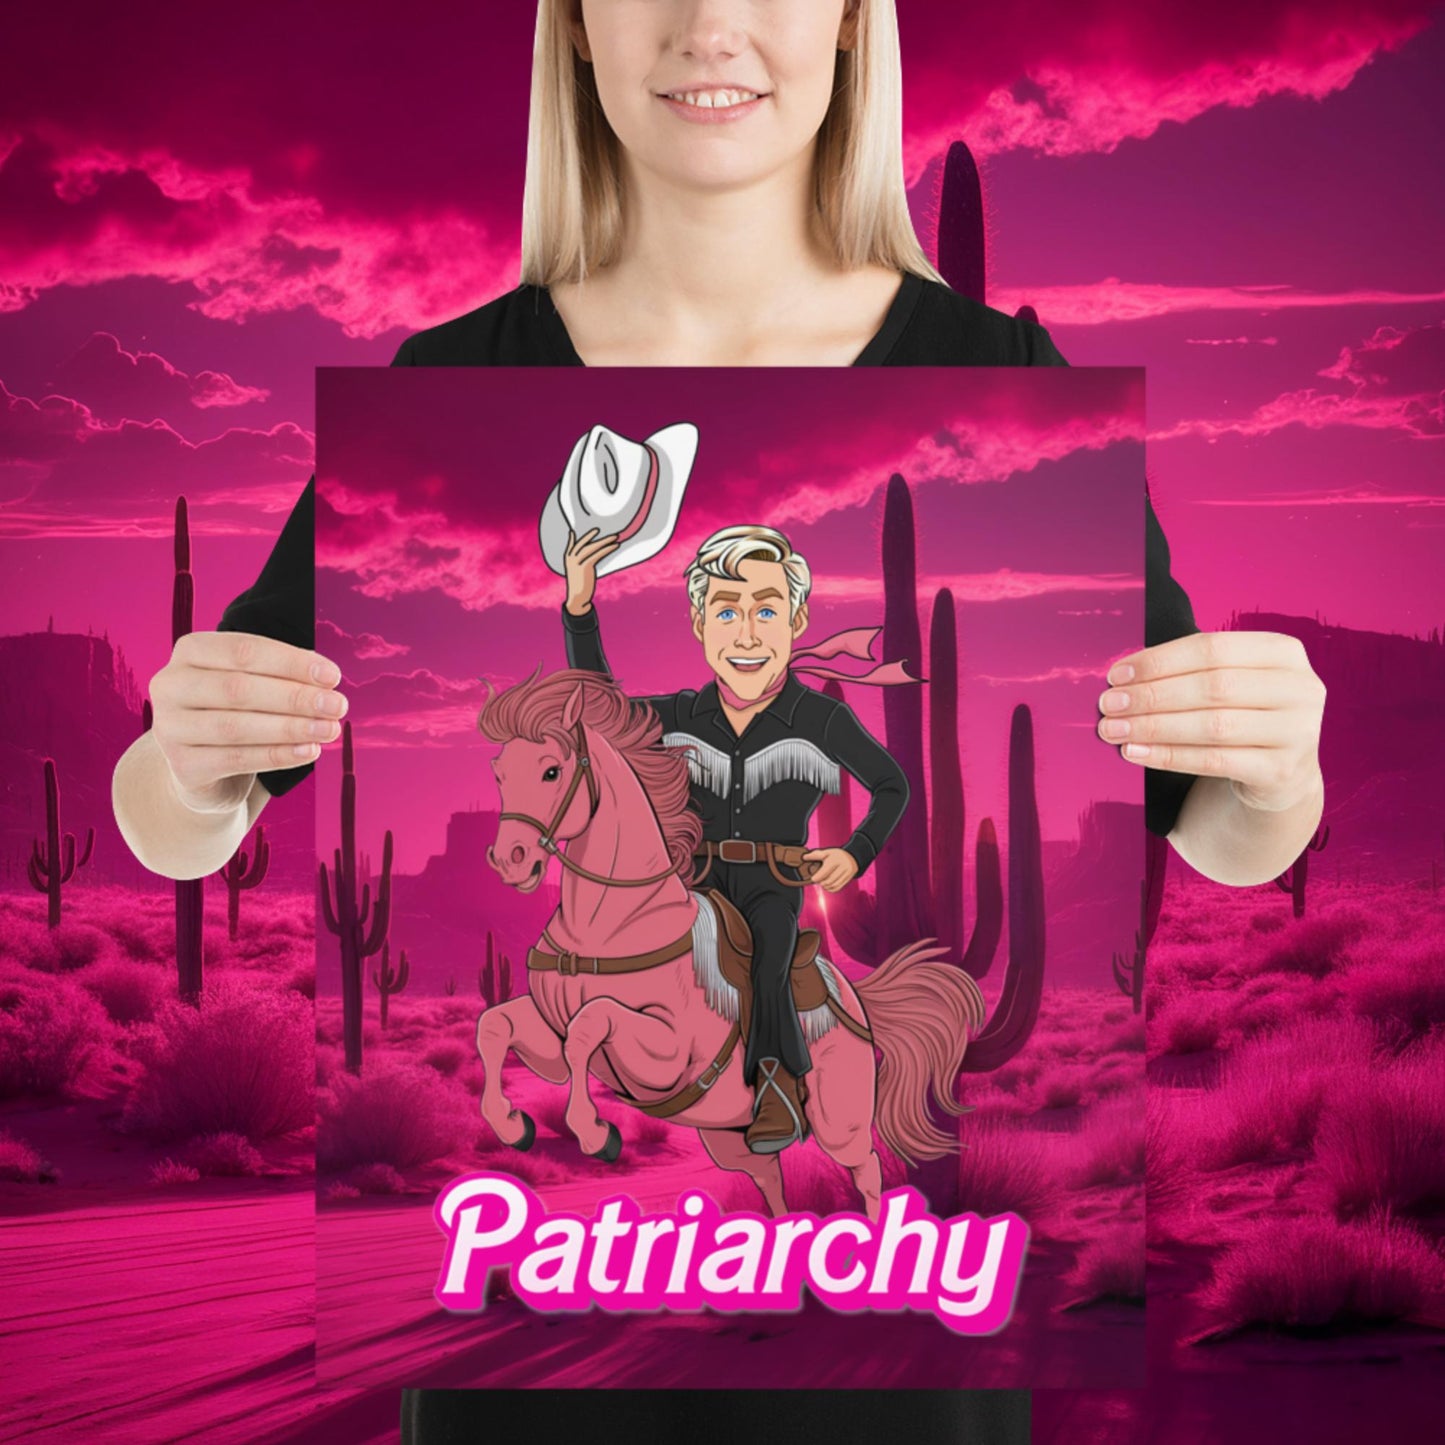 Ken Barbie Movie When I found out the patriarchy wasn't just about horses, I lost interest Poster Next Cult Brand